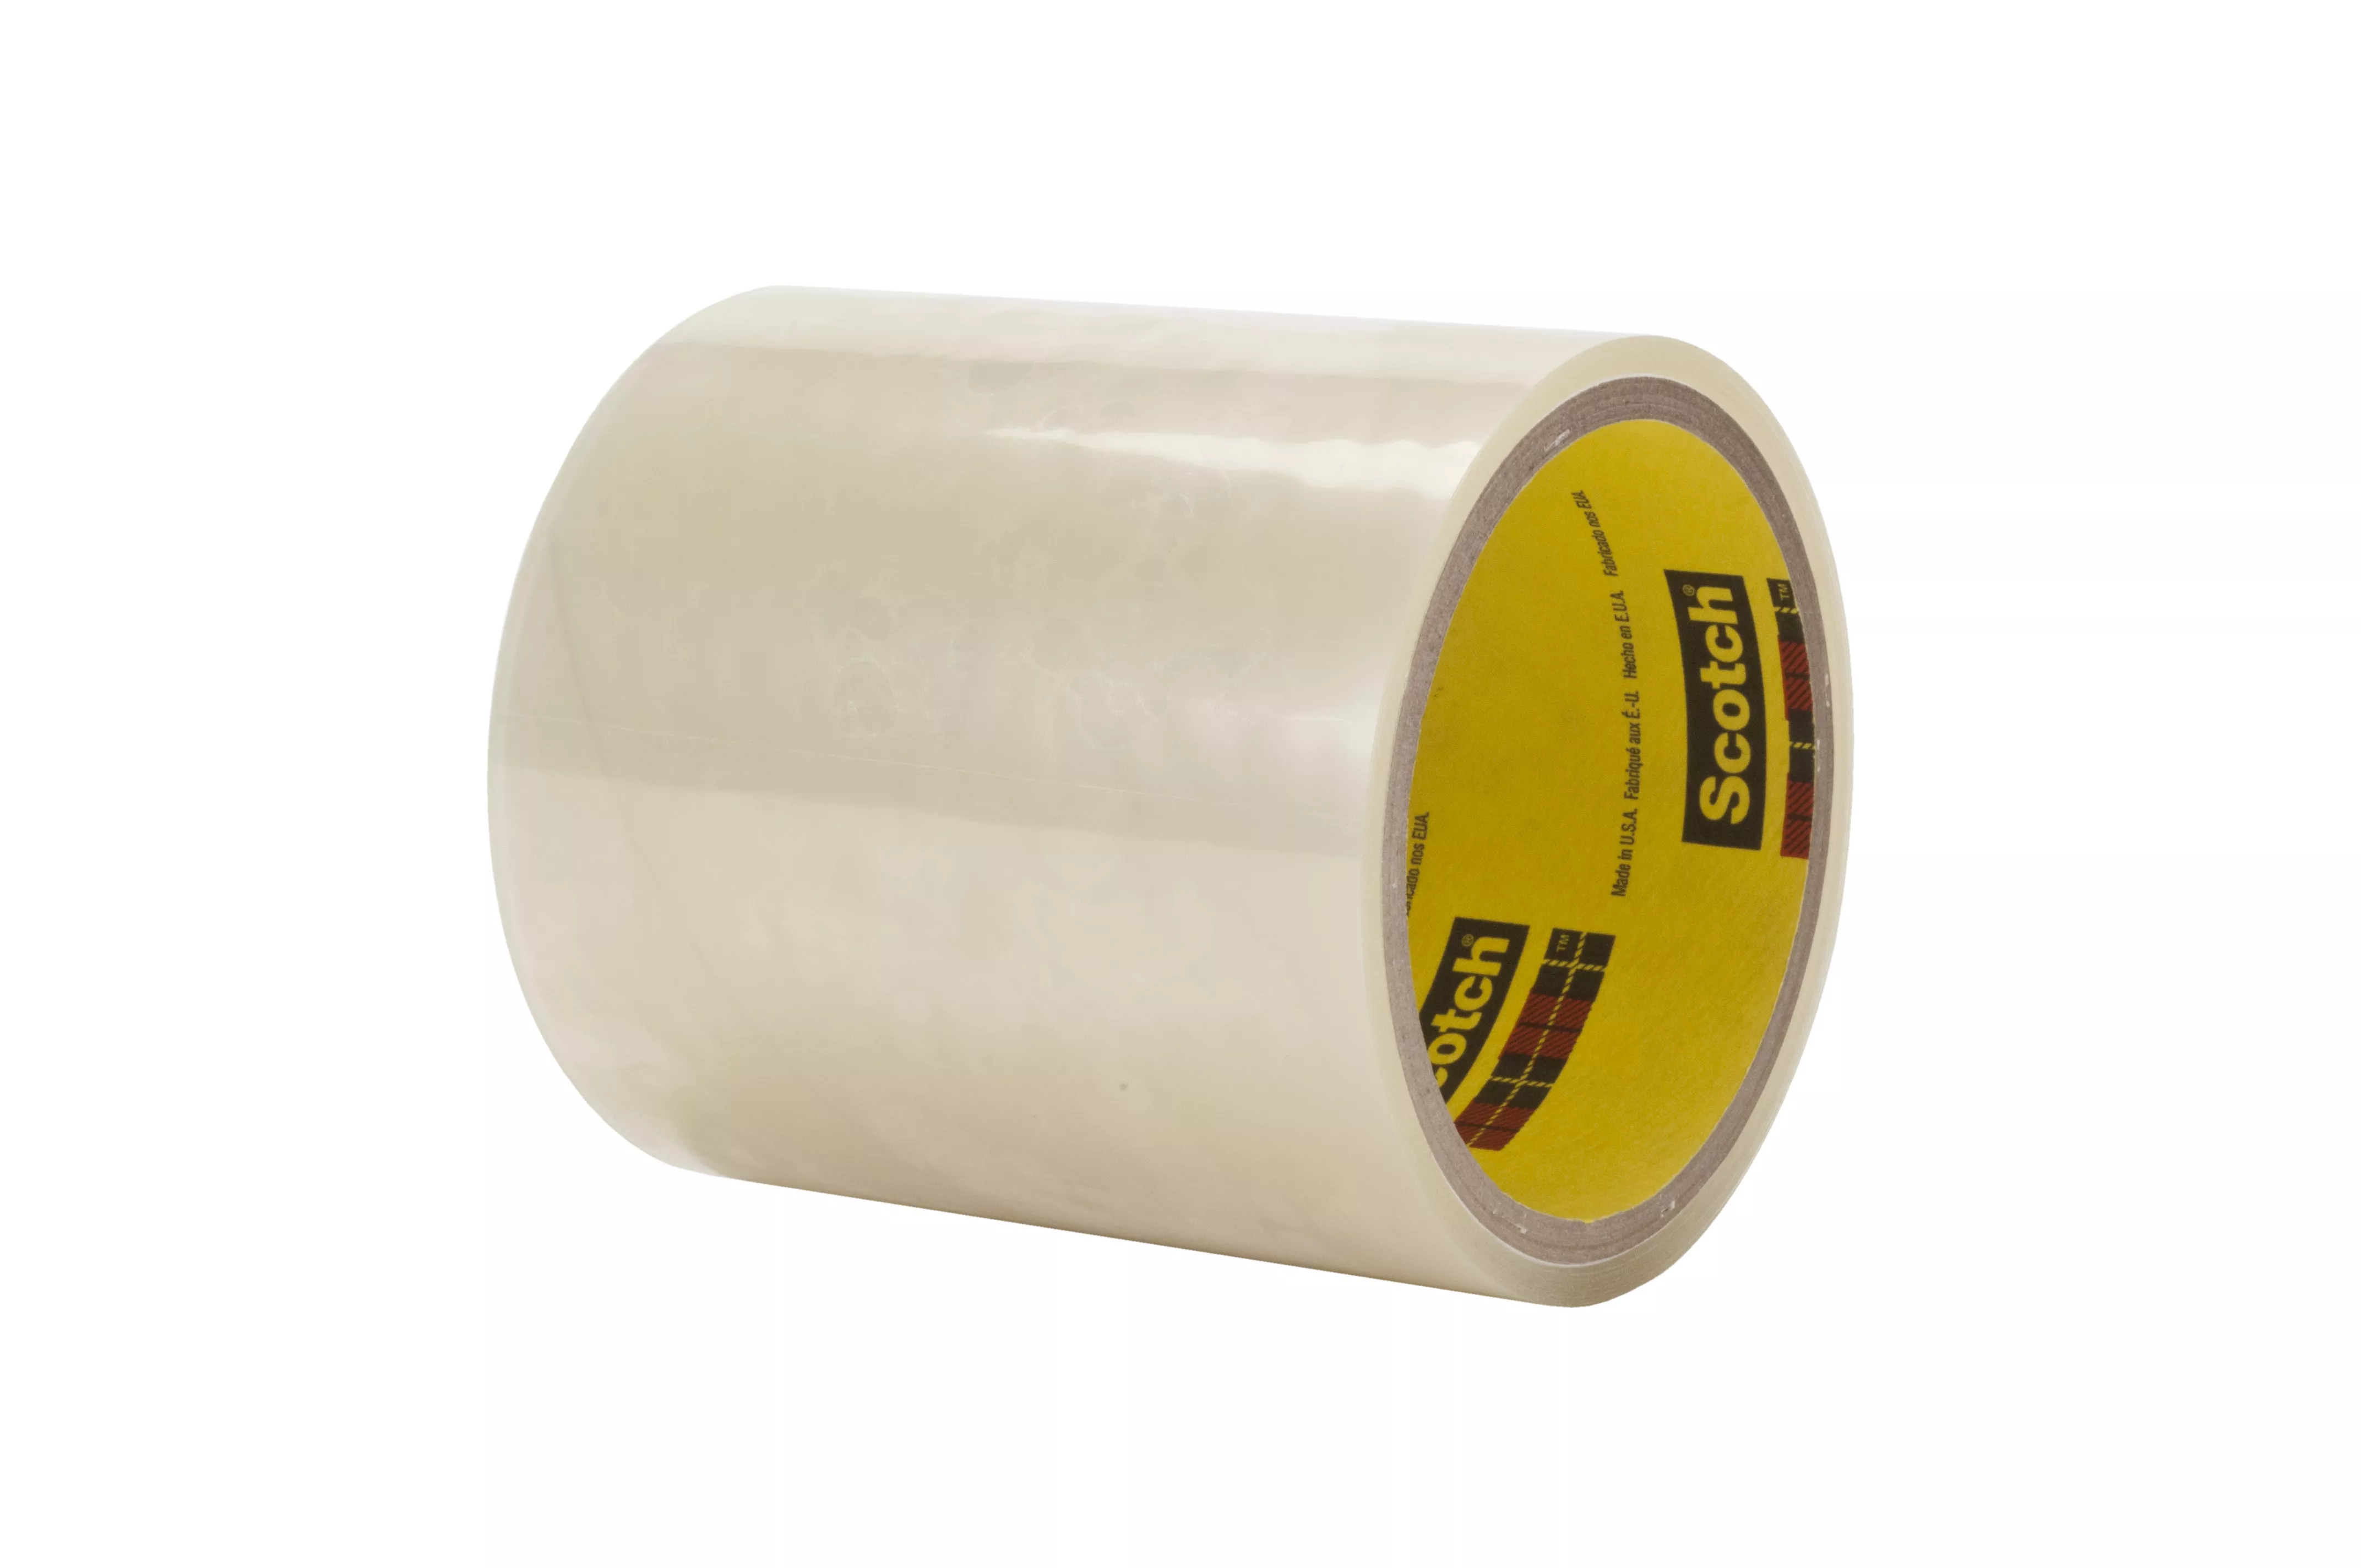 3M™ Adhesive Transfer Tape 467MP, Clear, 13 in x 60 yd, 2 mil, 4 rolls
per case